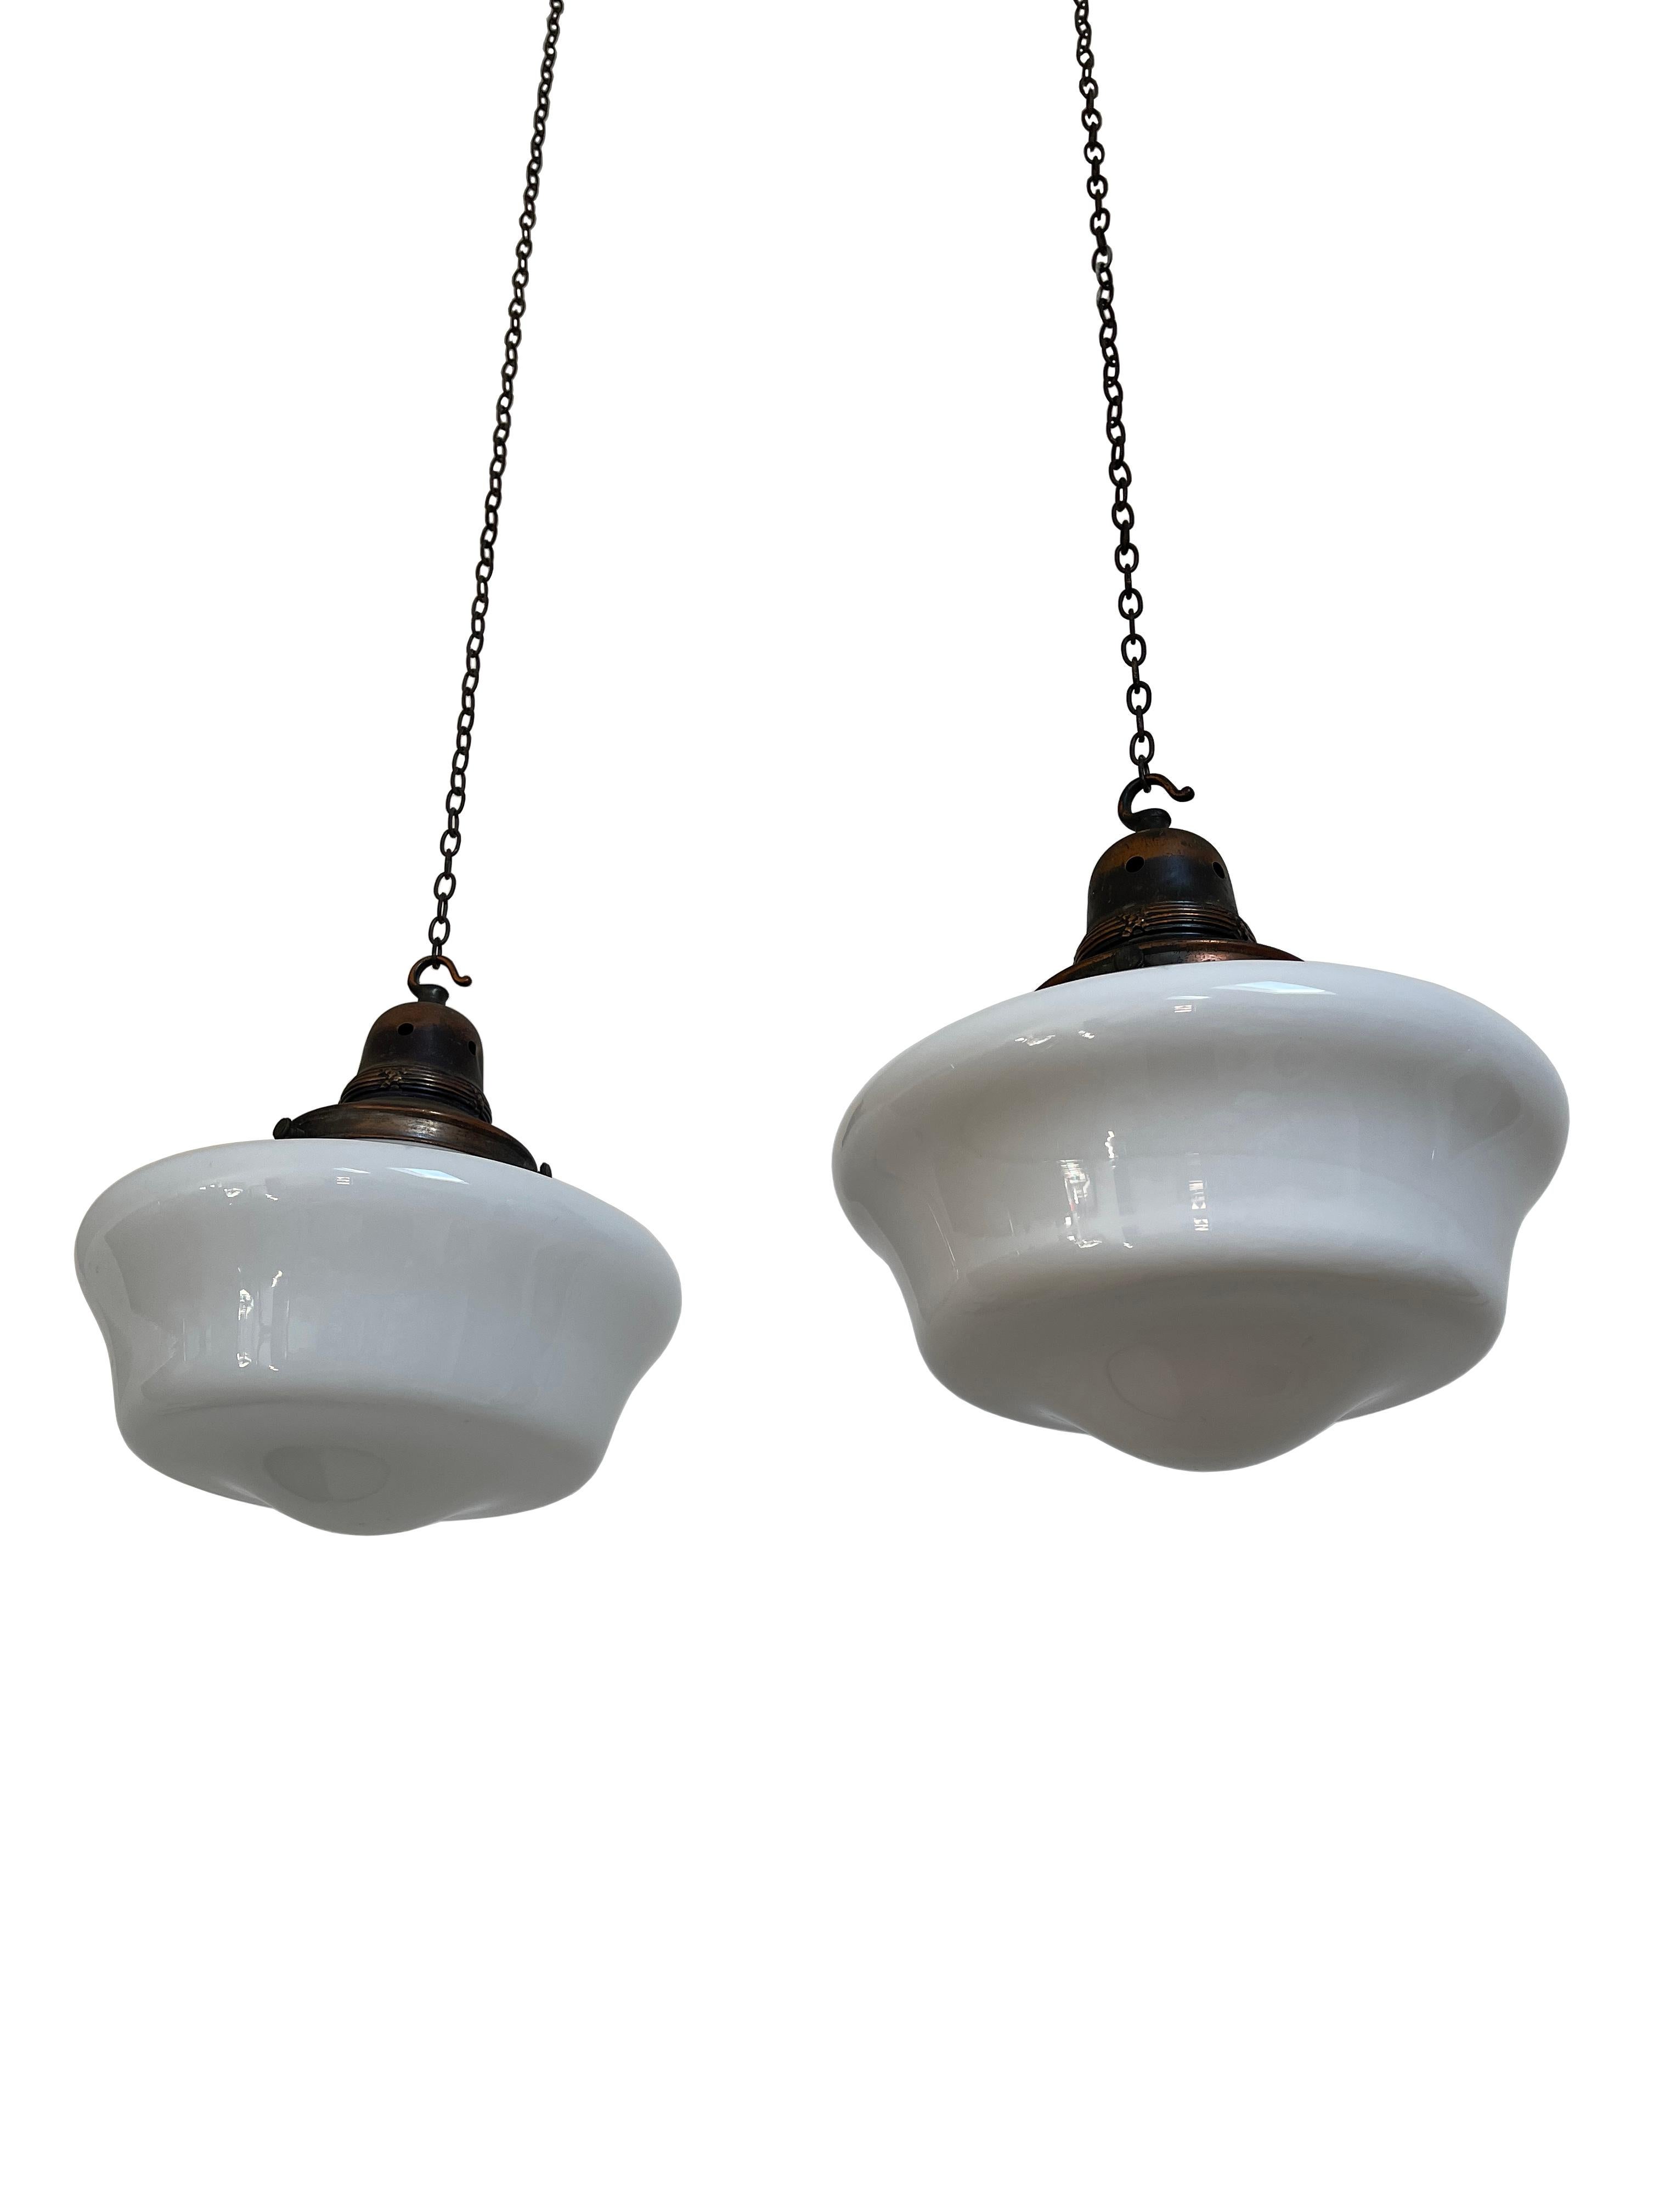 - A fabulous pair of original church opaline glass pendant lights with patinated copper galleries, circa 1930.
- Wear commensurate with age, all in a good condition, the copper galleries are aged worn.
- Rewired with braided flex and PAT